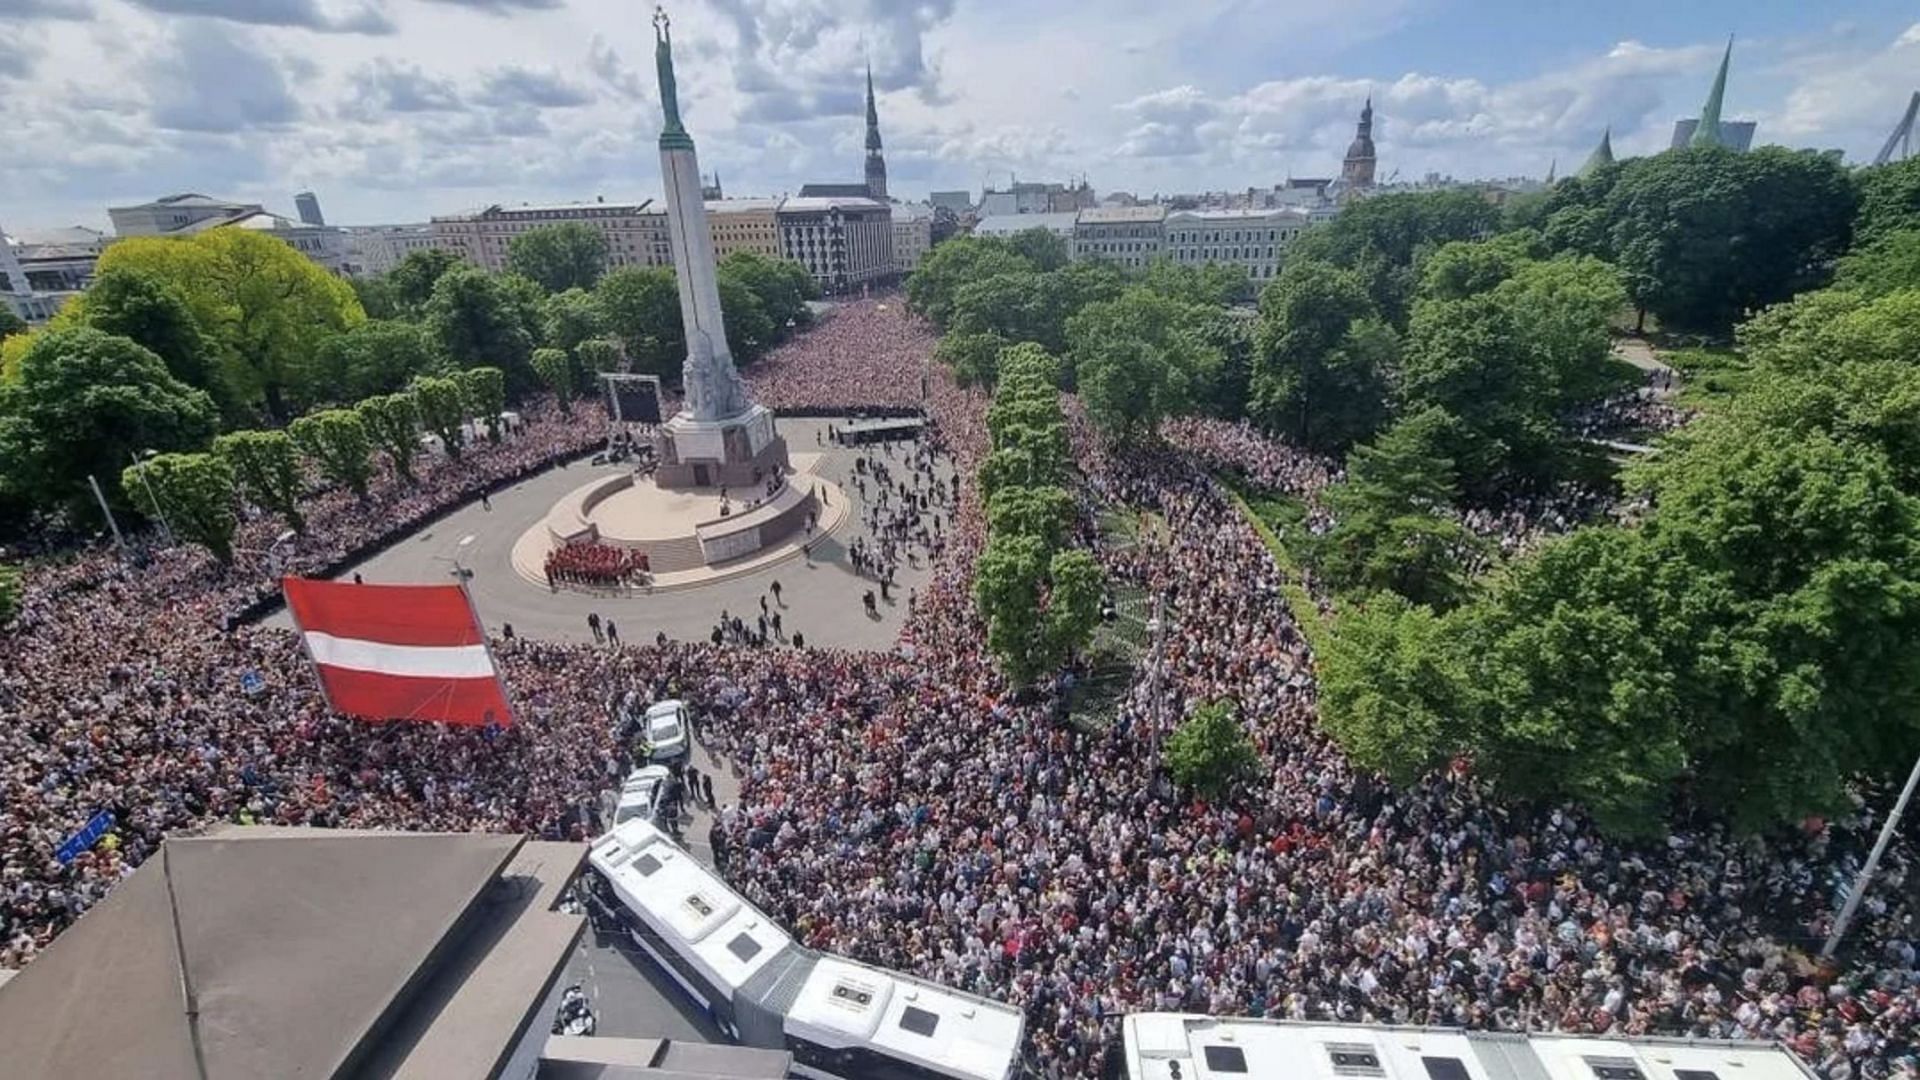 Latvian nationals flooded the streets of Riga, gathering around the iconic Freedom Monument